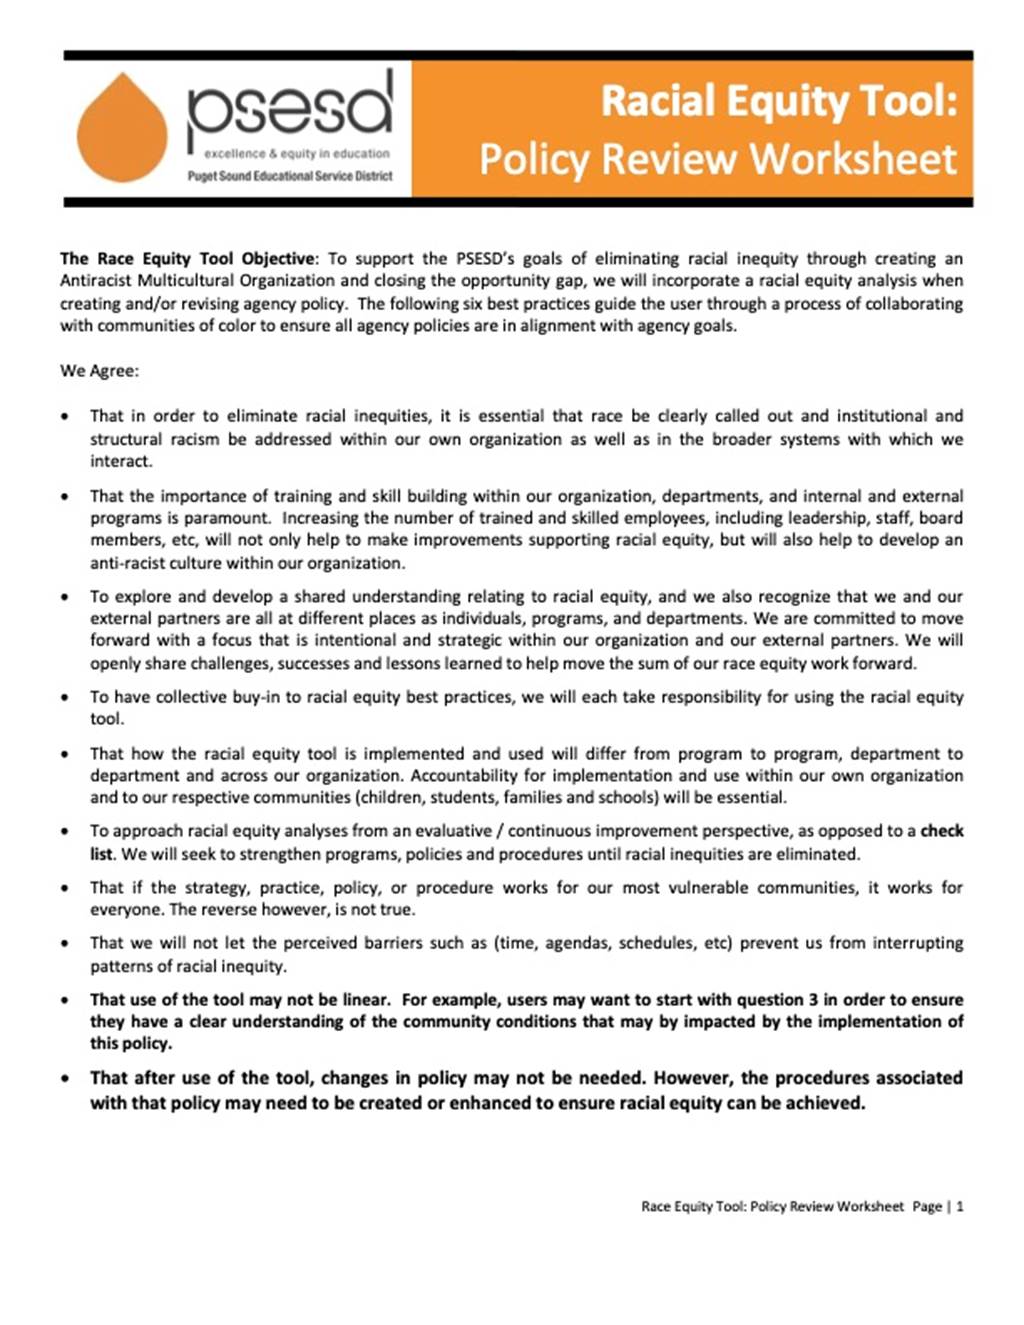 Racial Equity Tool: Policy Review Worksheet - image